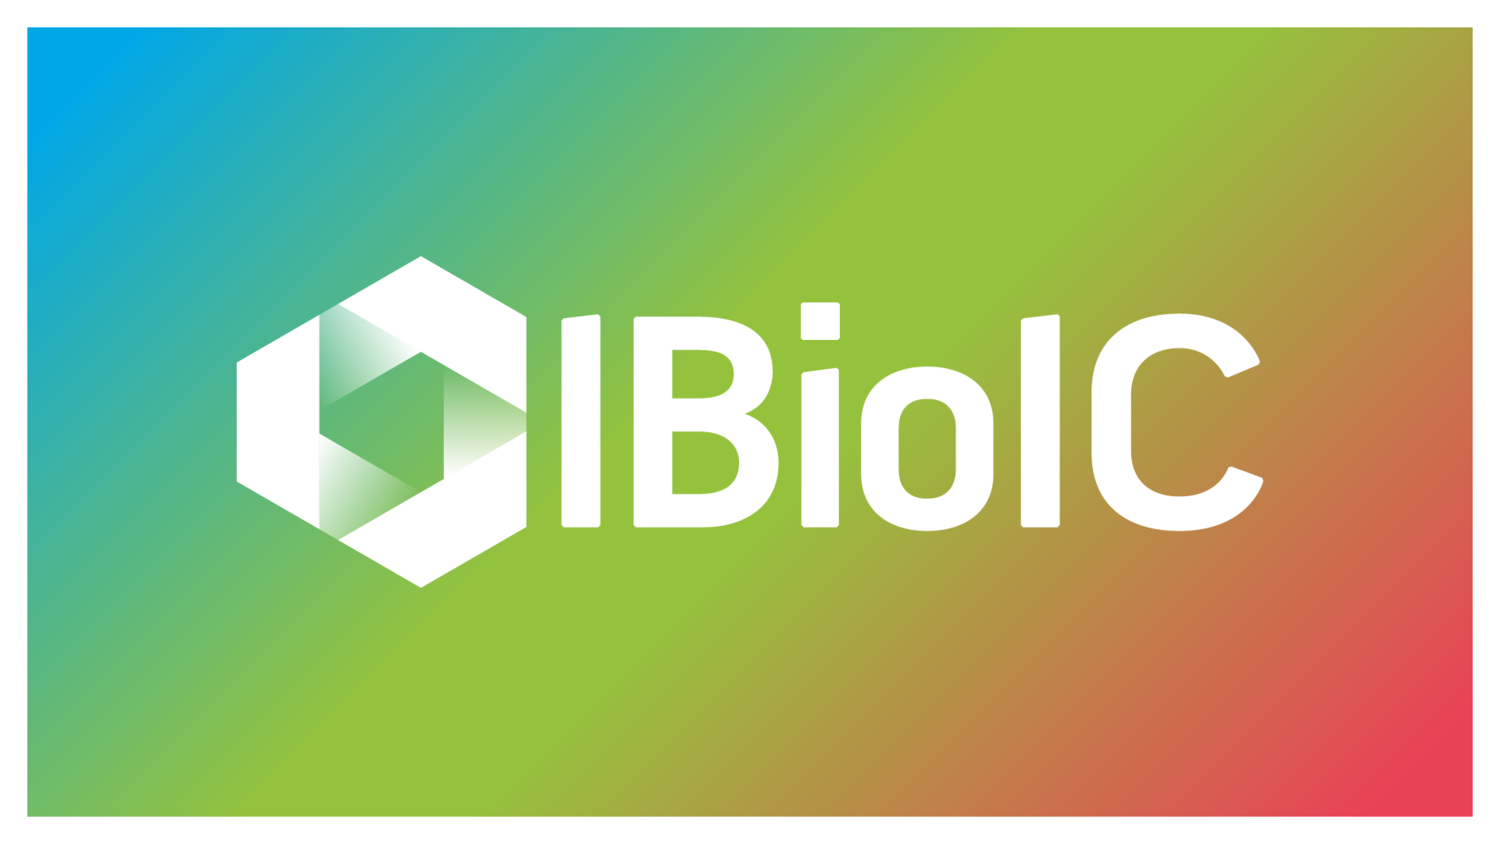 IBioiC 9th Conference: Resilience and the Bioeconomy